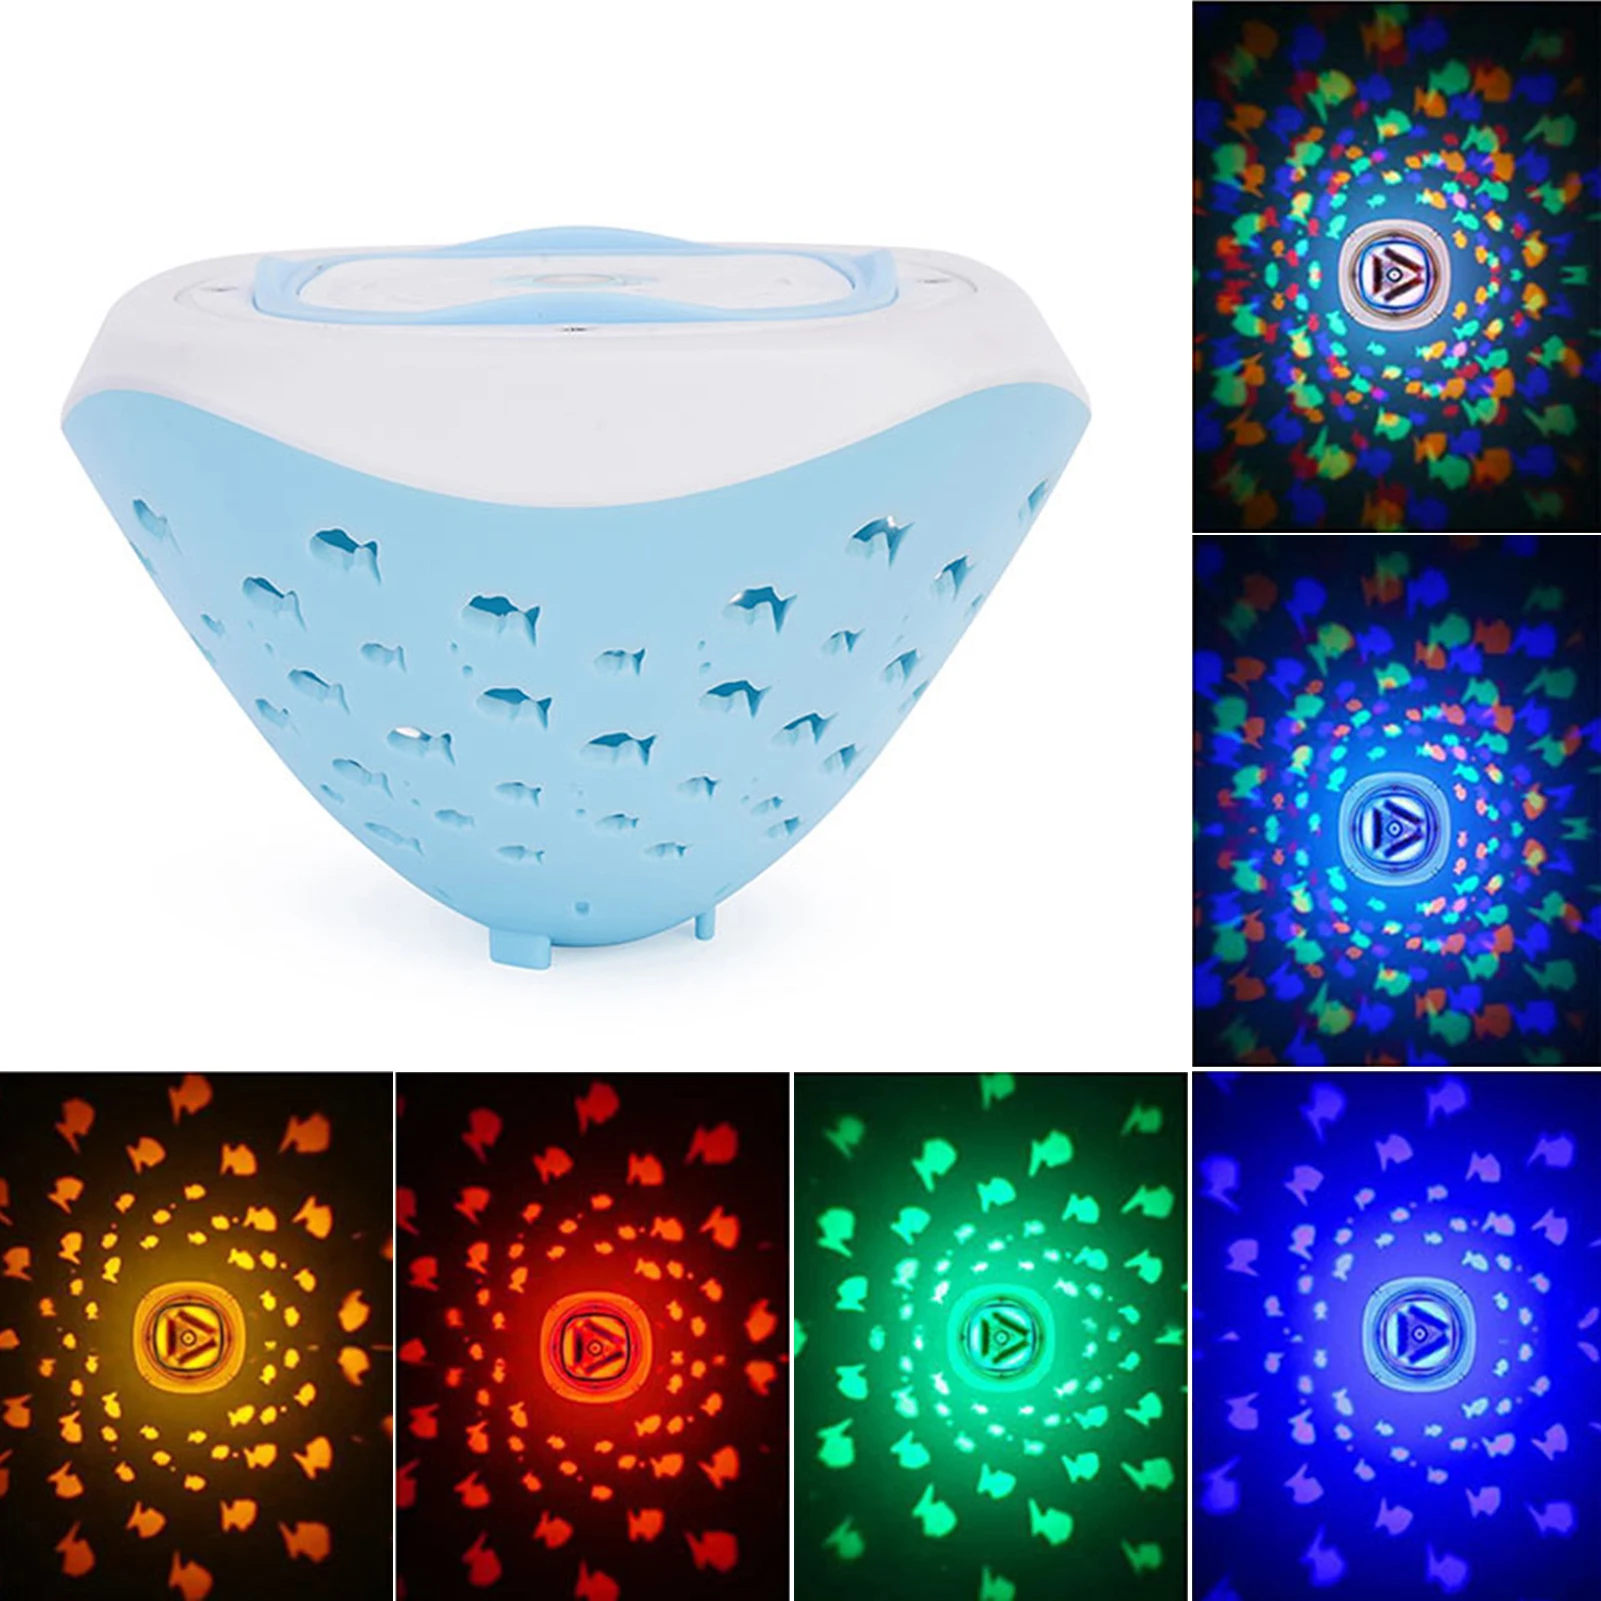 

Underwater Submersible LED Lights For Bath Tub Waterproof For Hot Tub Pond Pool Fountain Waterfall Aquarium Kids Toy Up Decor